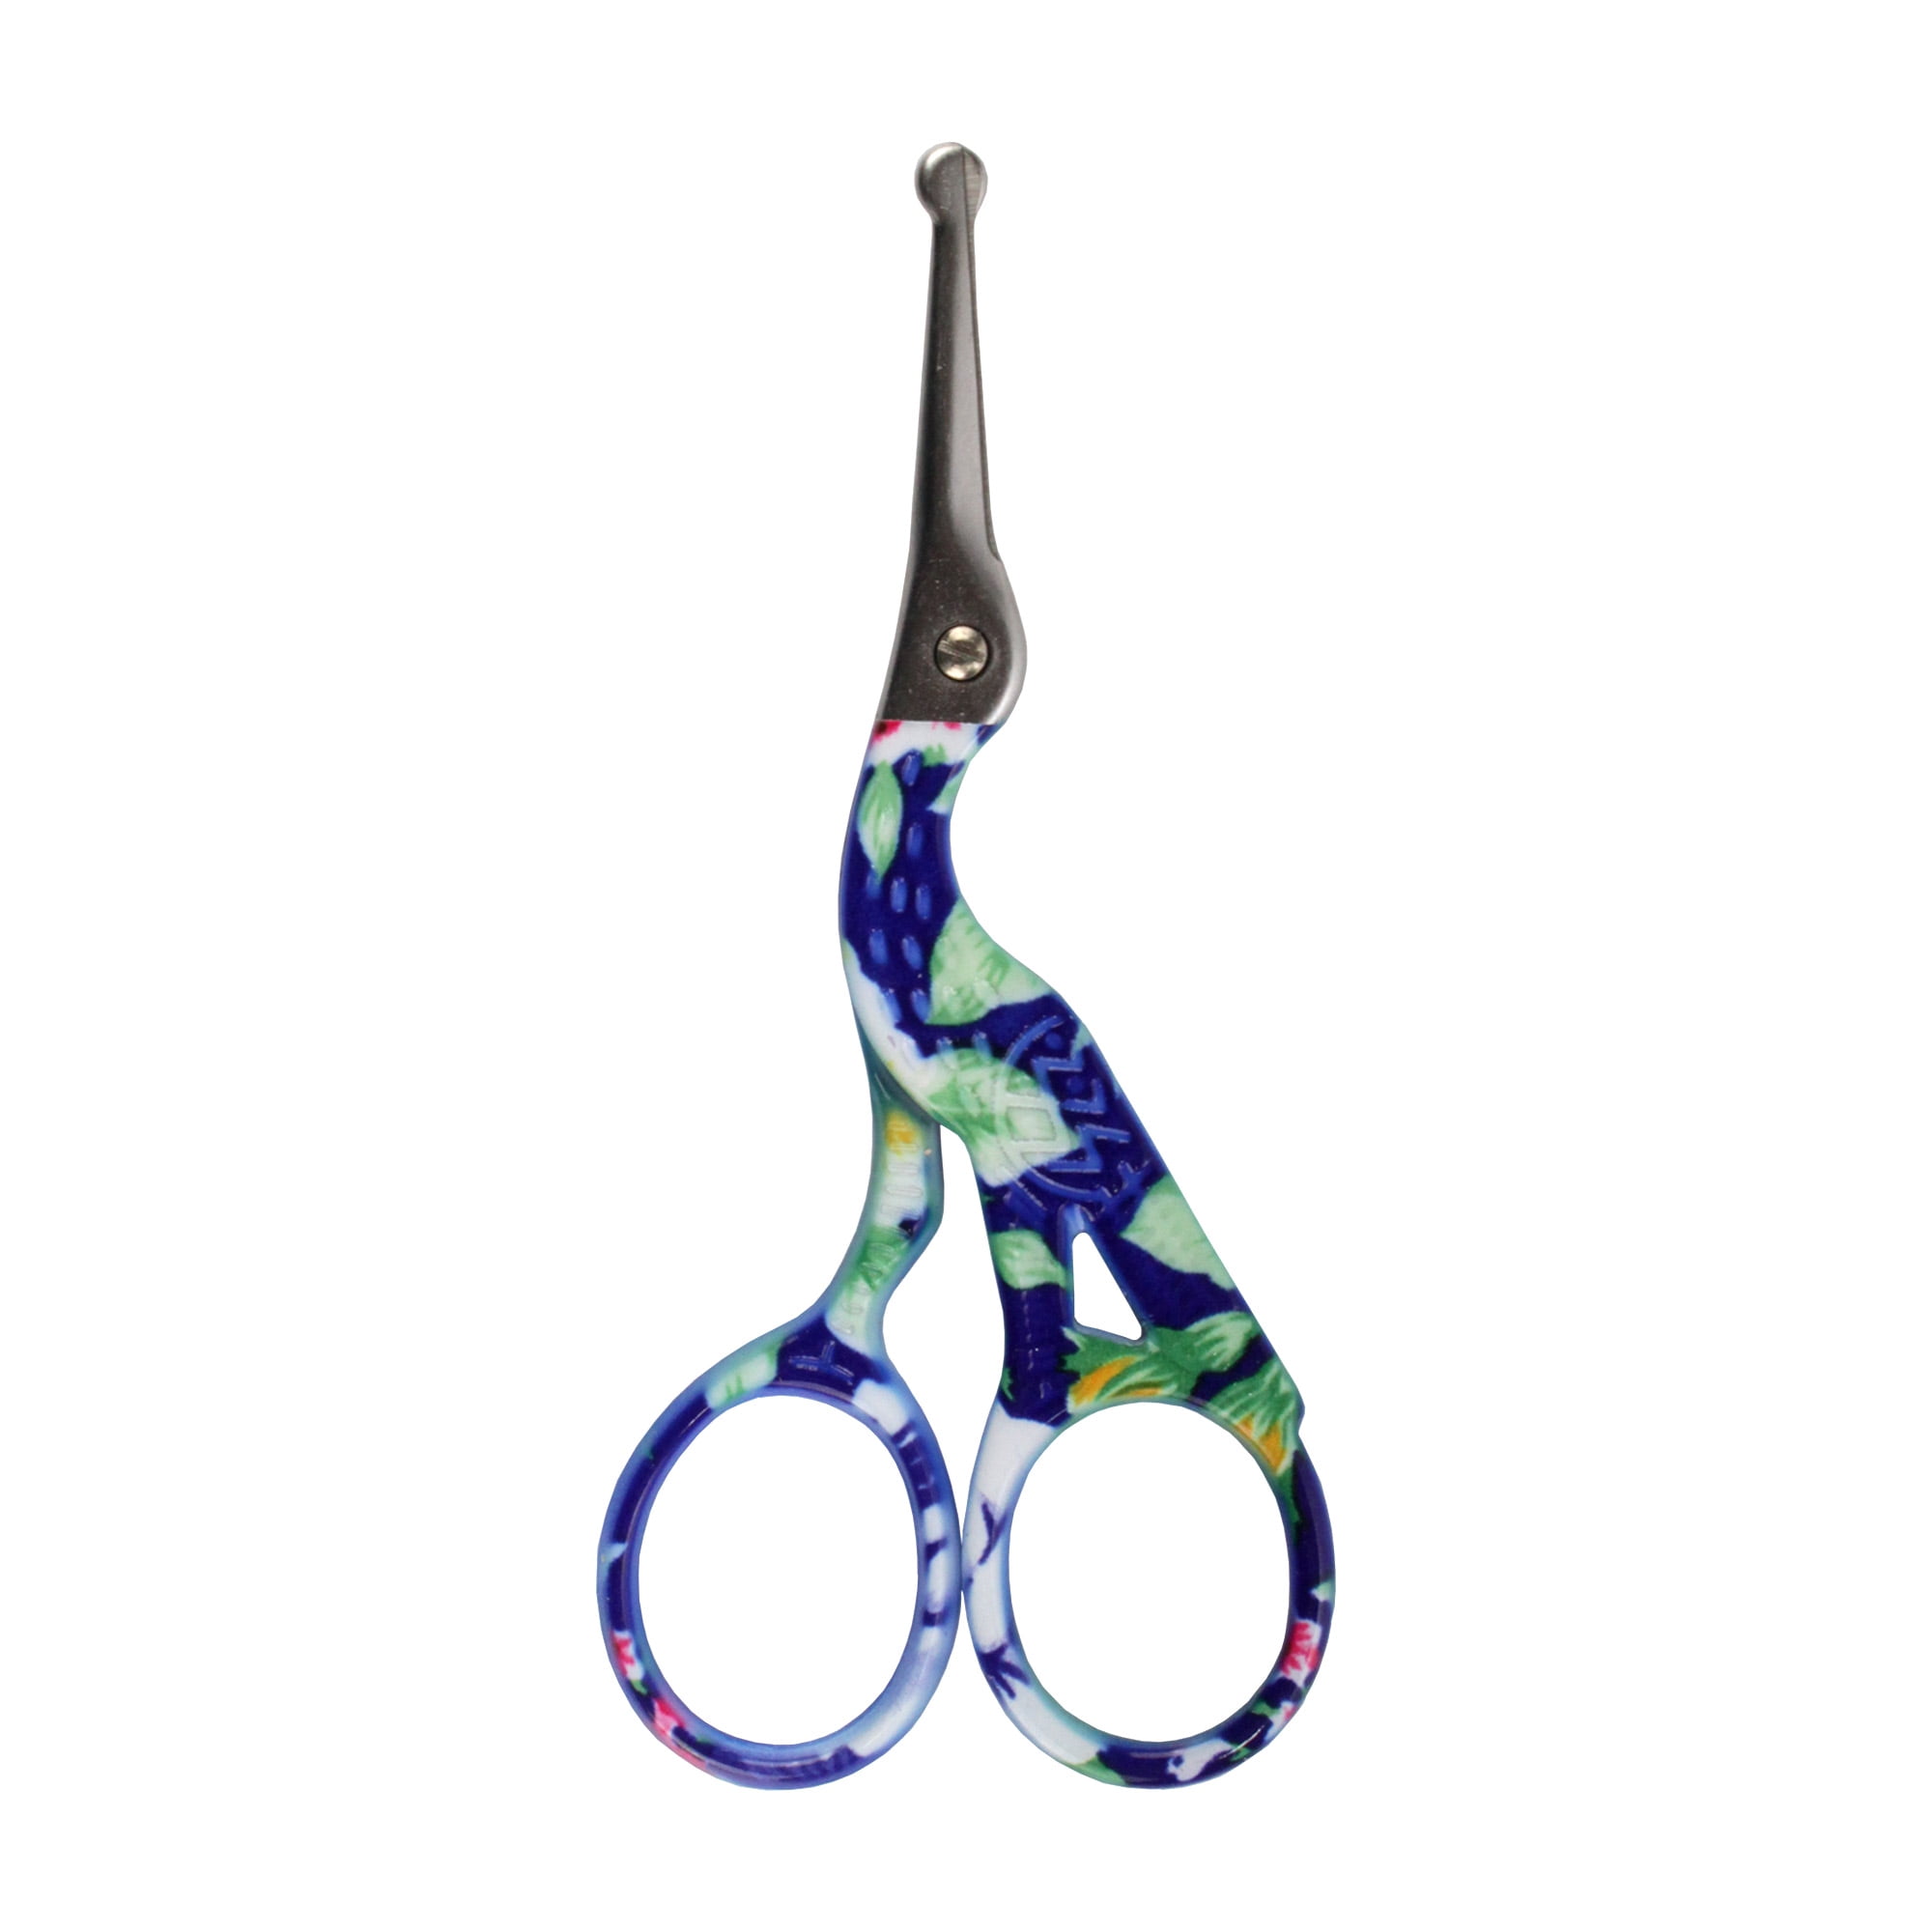 Stork Embroidery Scissors And Eyebrow Cut, Stitch Sewing Knitting Scissors